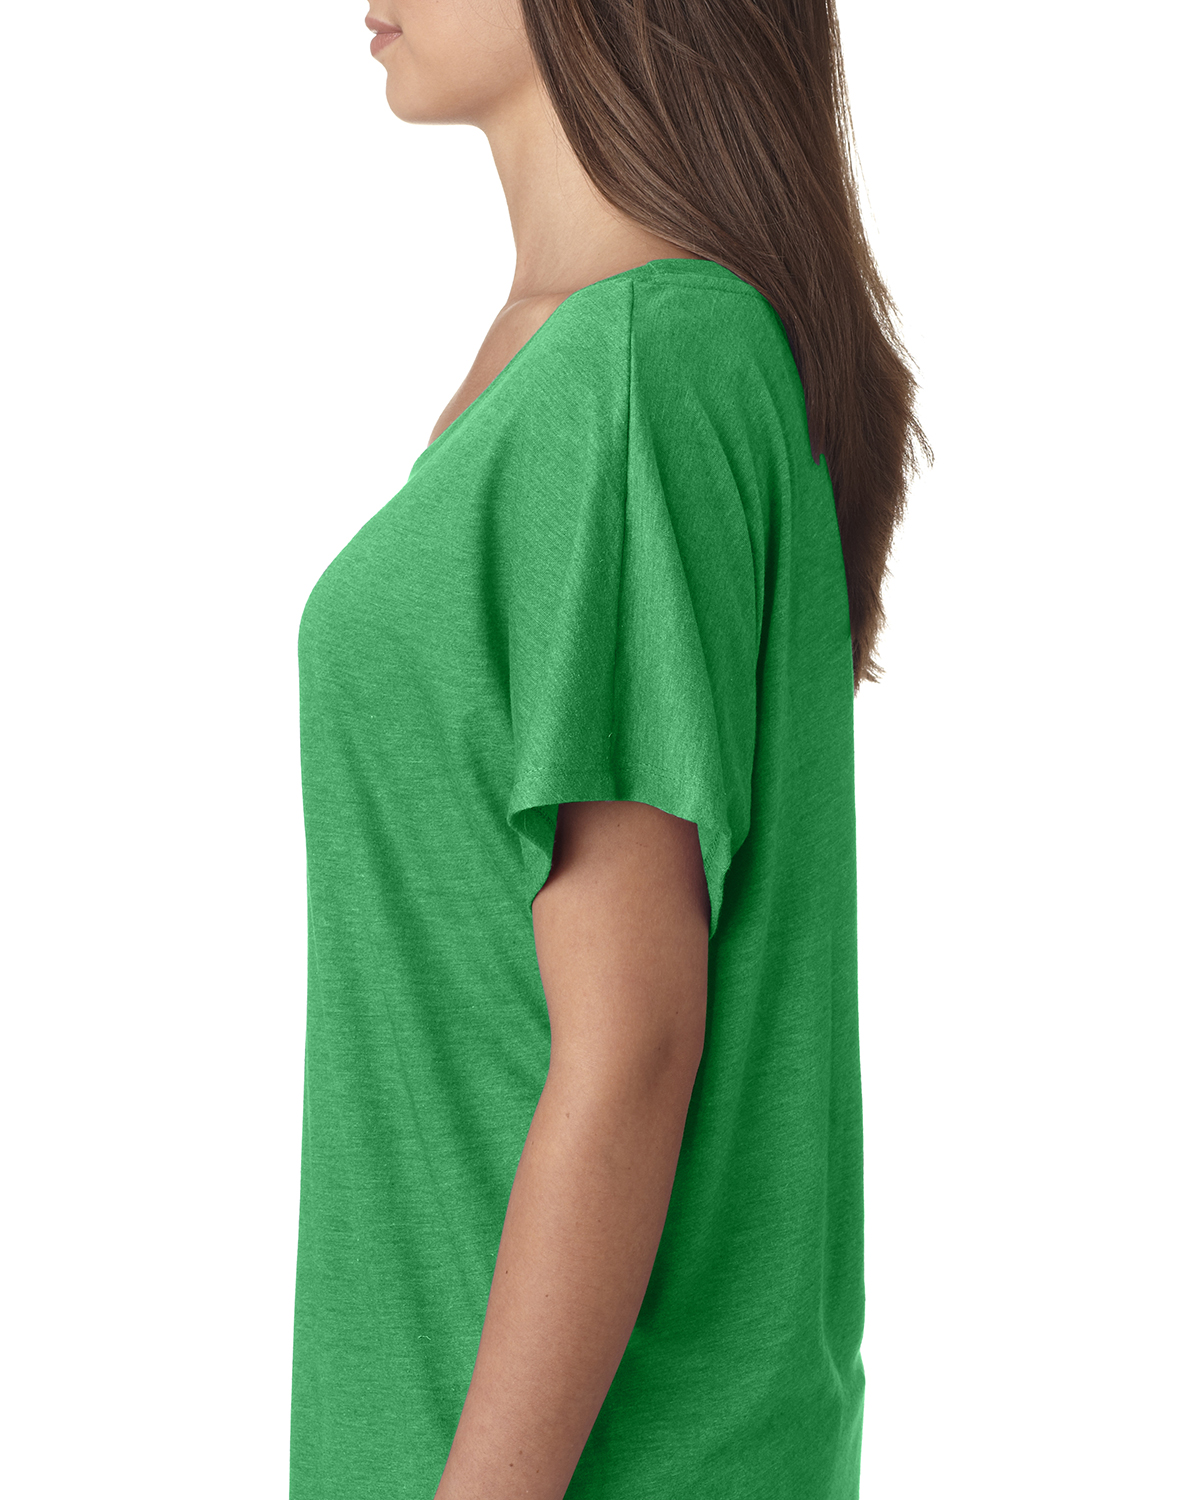 NEW Next Level Junior Fit Triblend Dolman Sleeve Relaxed Fit S-XL T-Shirt R-6760 